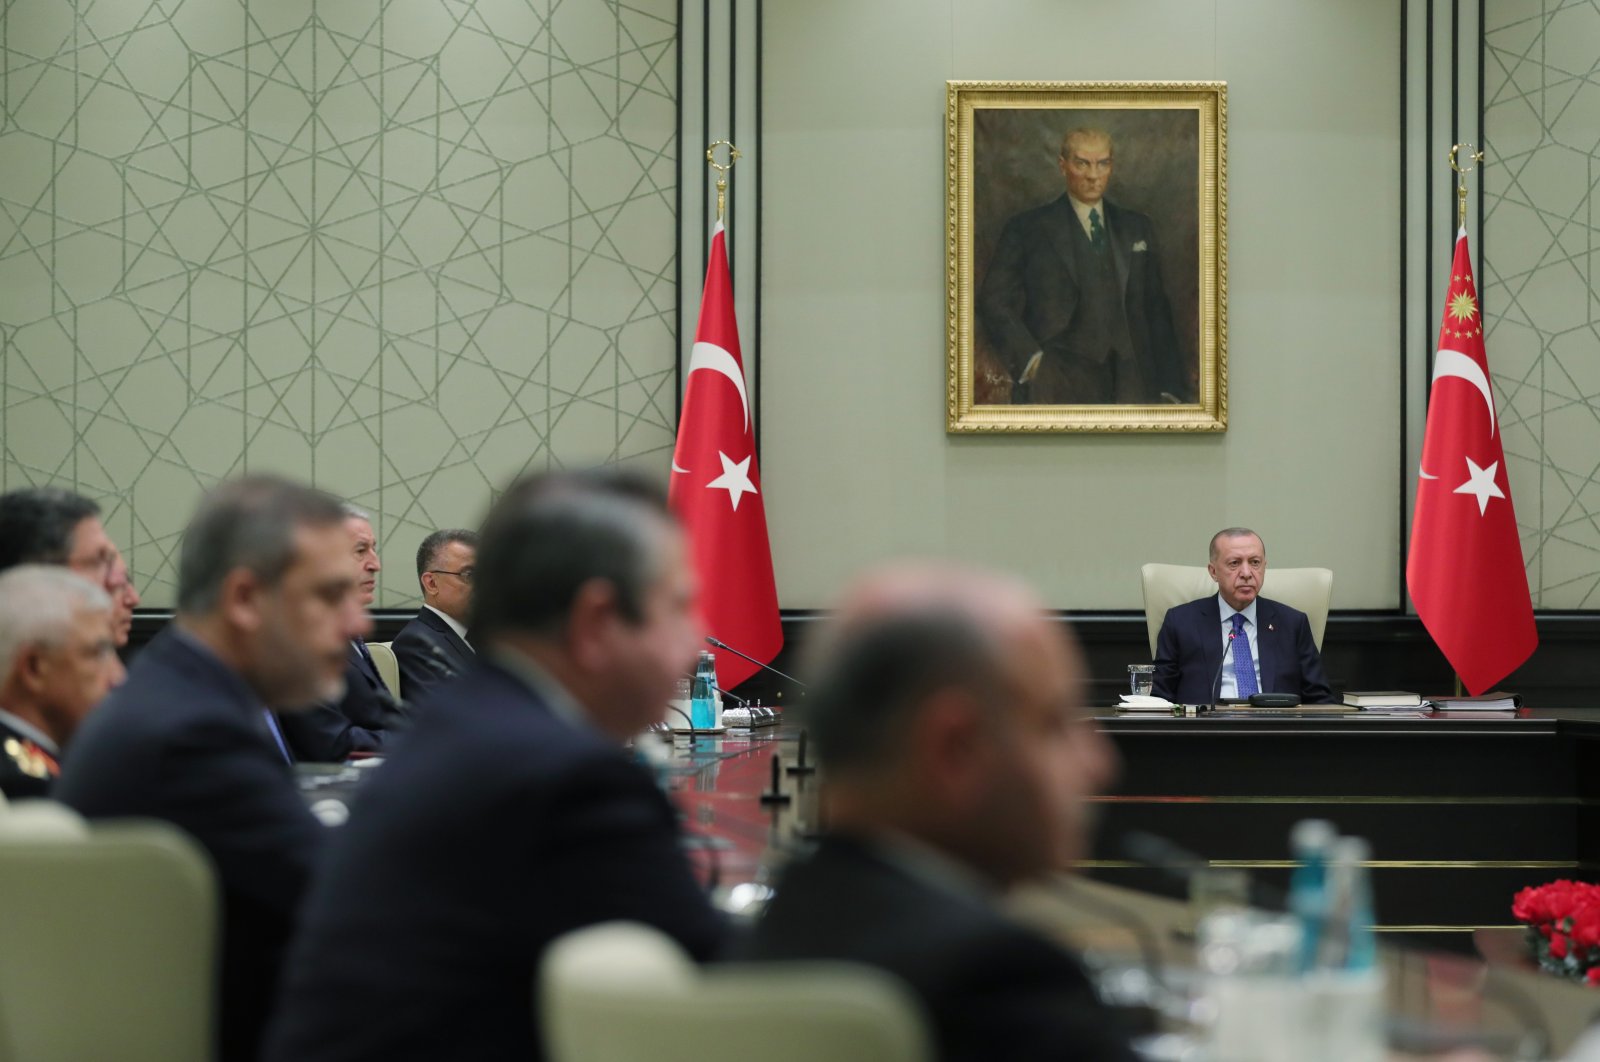 Turkey's National Security Council gathered under the leadership of President Recep Tayyip Erdoğan at the Presidential Complex in Ankara, Turkey, Sept. 30, 2021 (AA Photo)